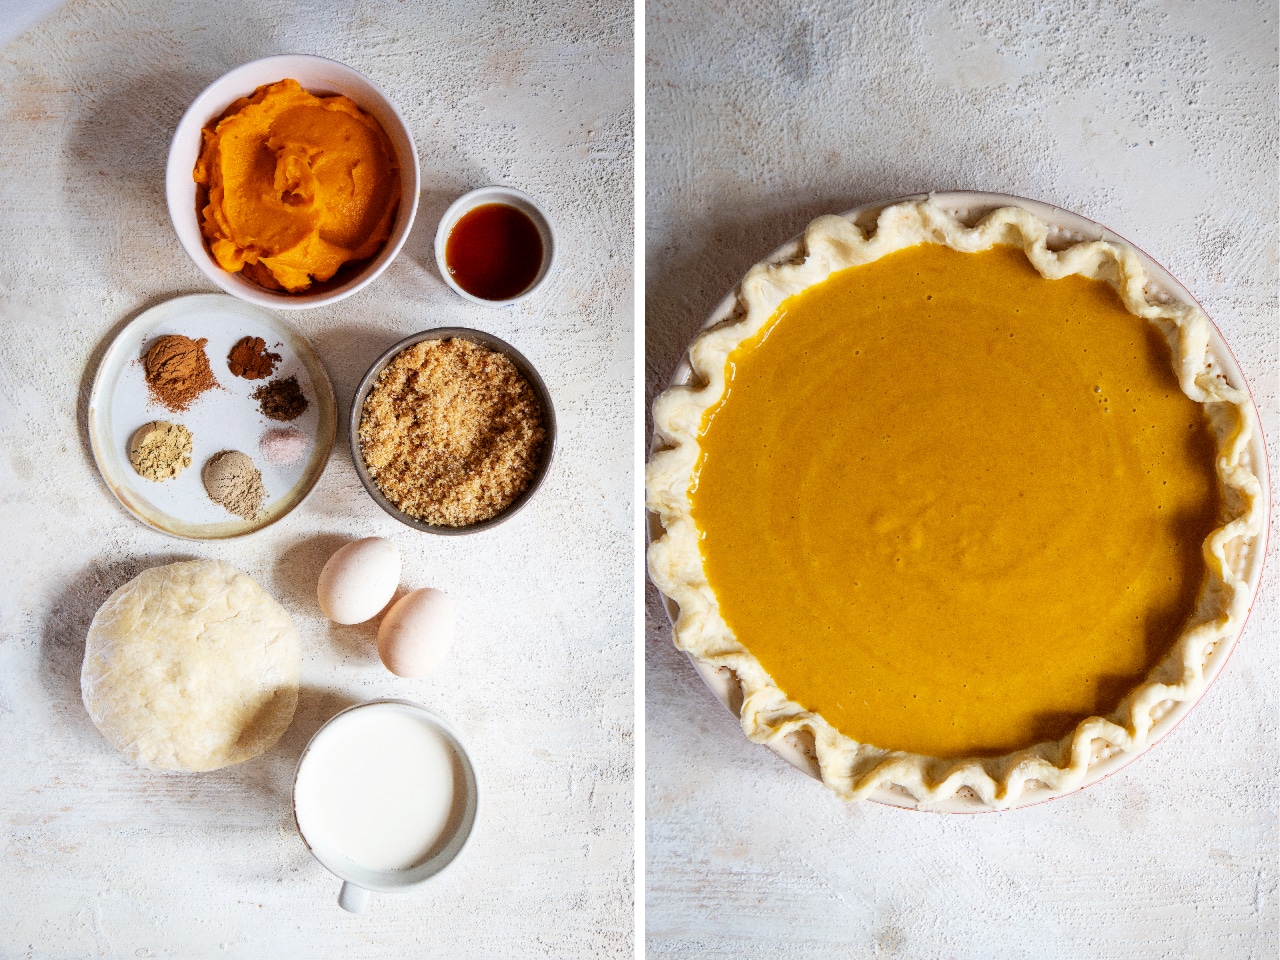 A photo of ingredients: pumpkin puree, spices, eggs, sugar, milk, and vanilla next to an image of the pumpkin pie filling inside the pie crust, on a white table.